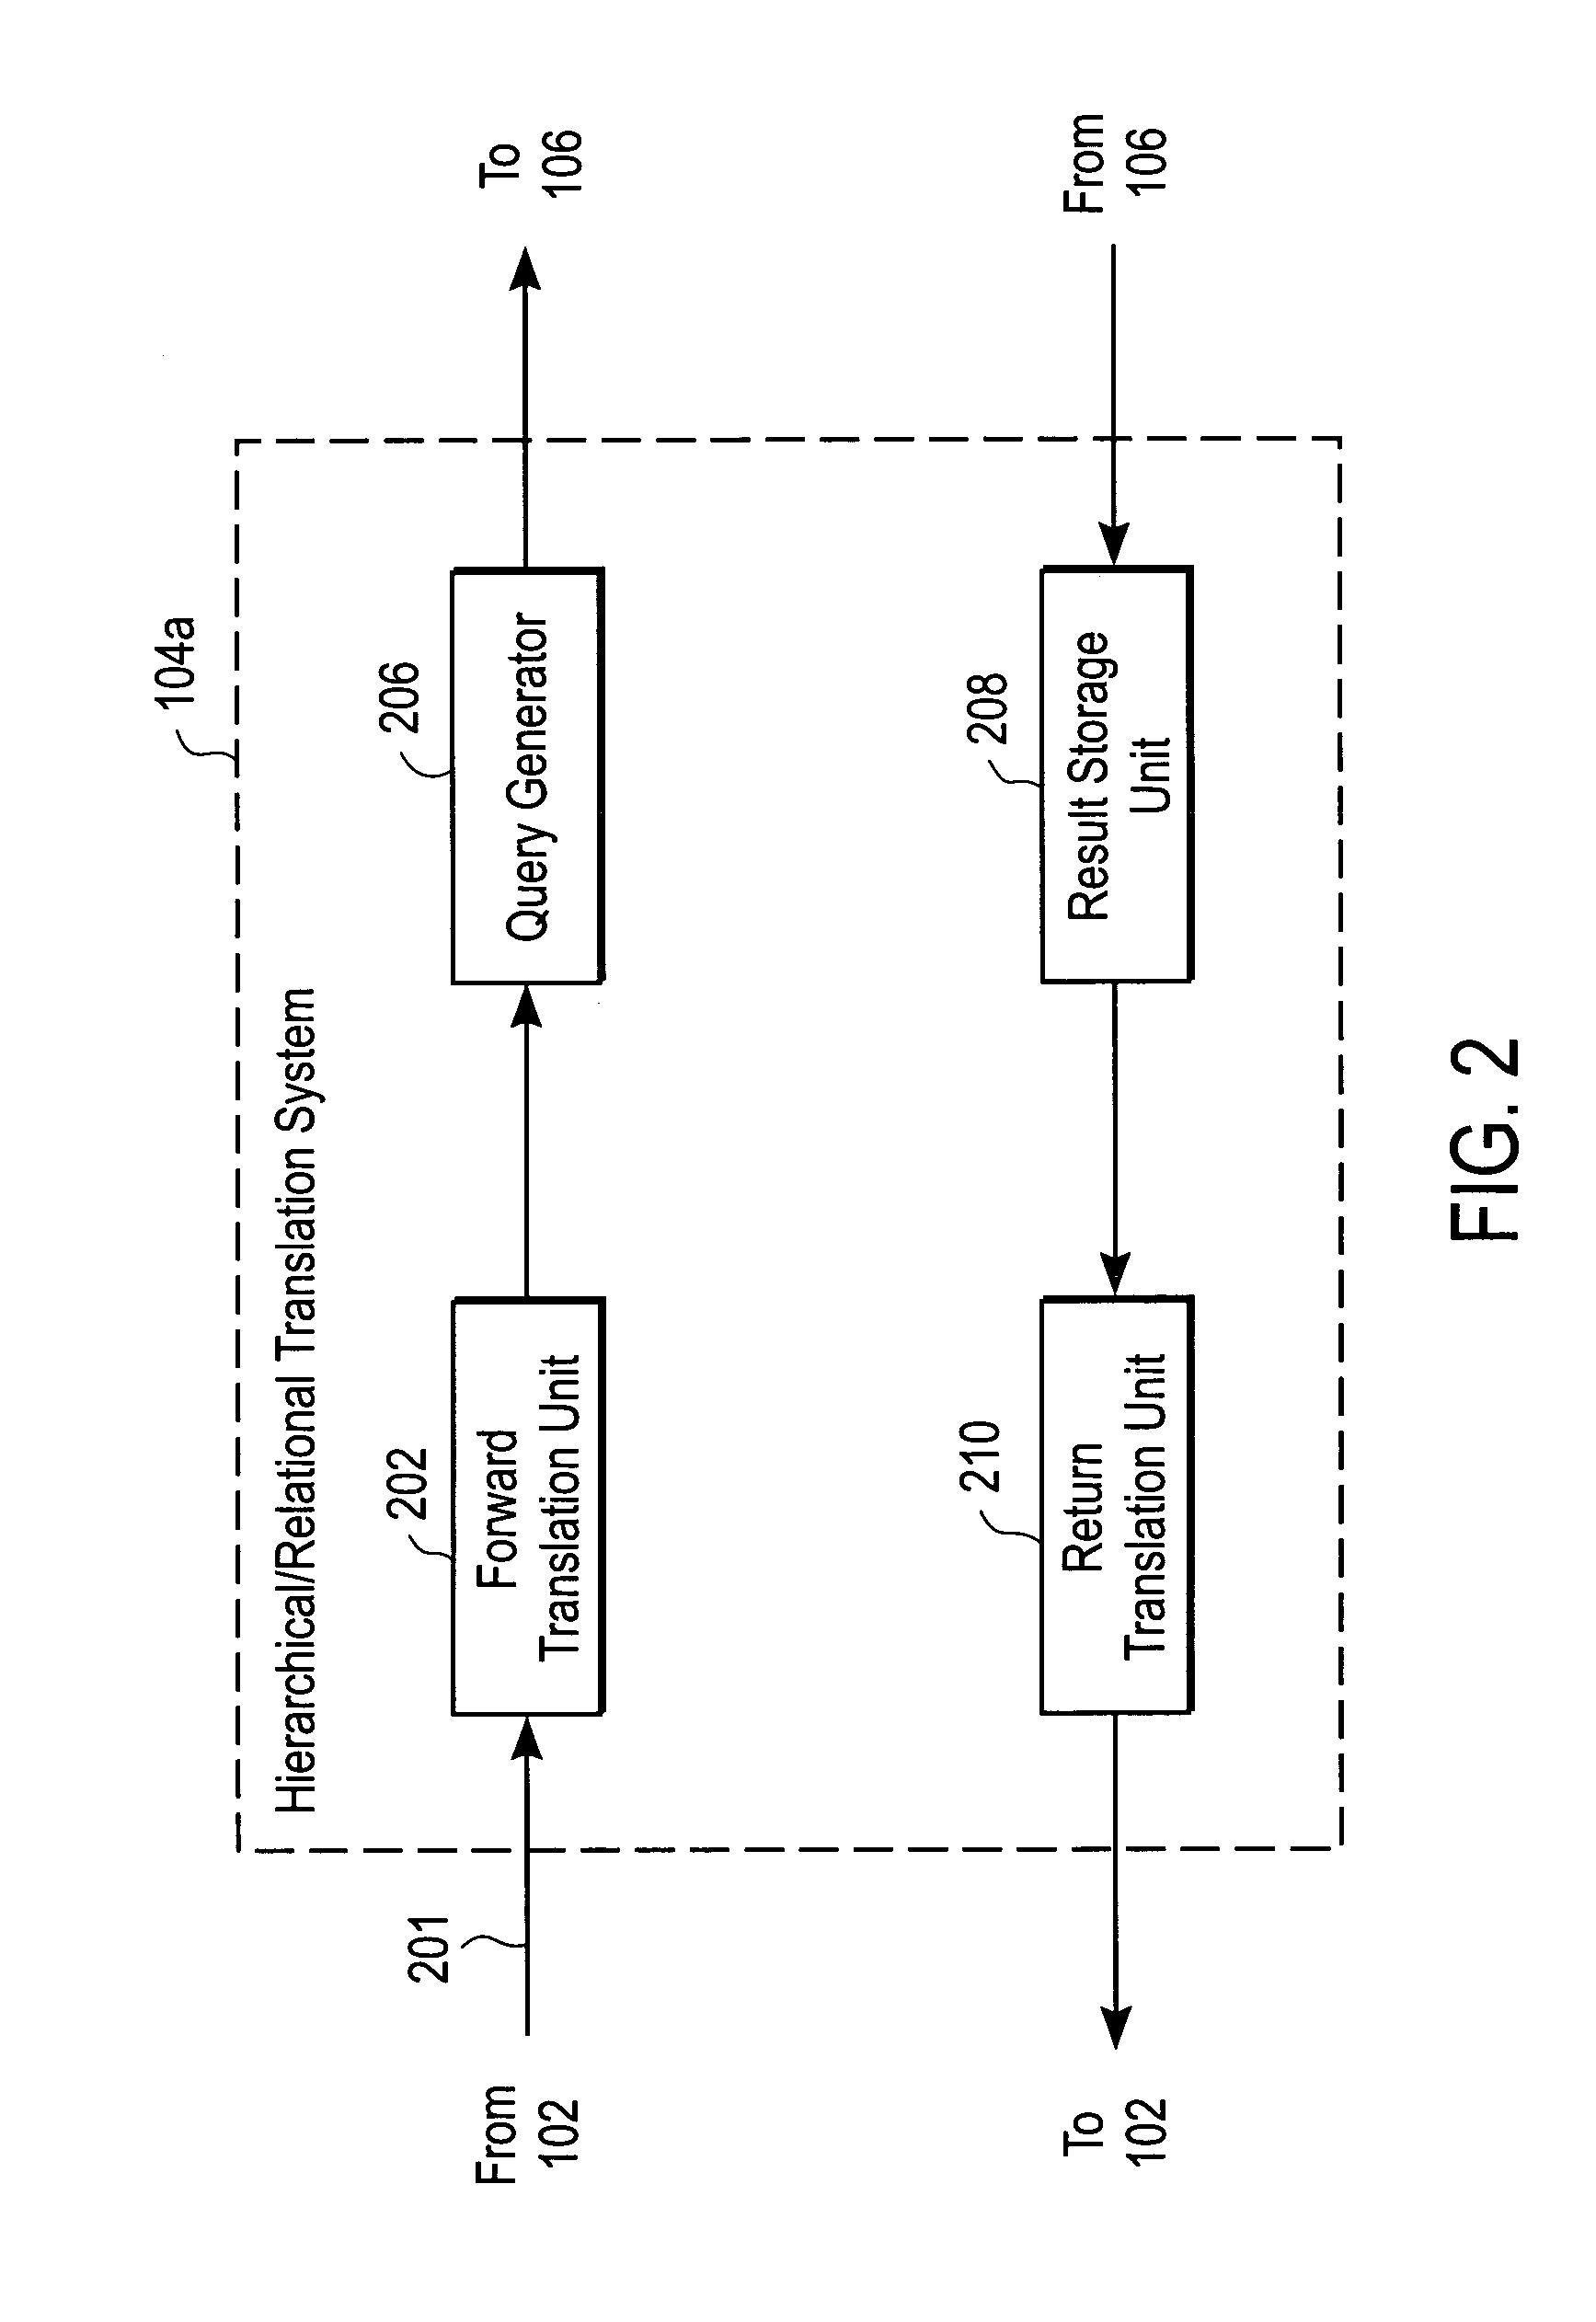 System and method for providing access to databases via directories and other hierarchical structures and interfaces